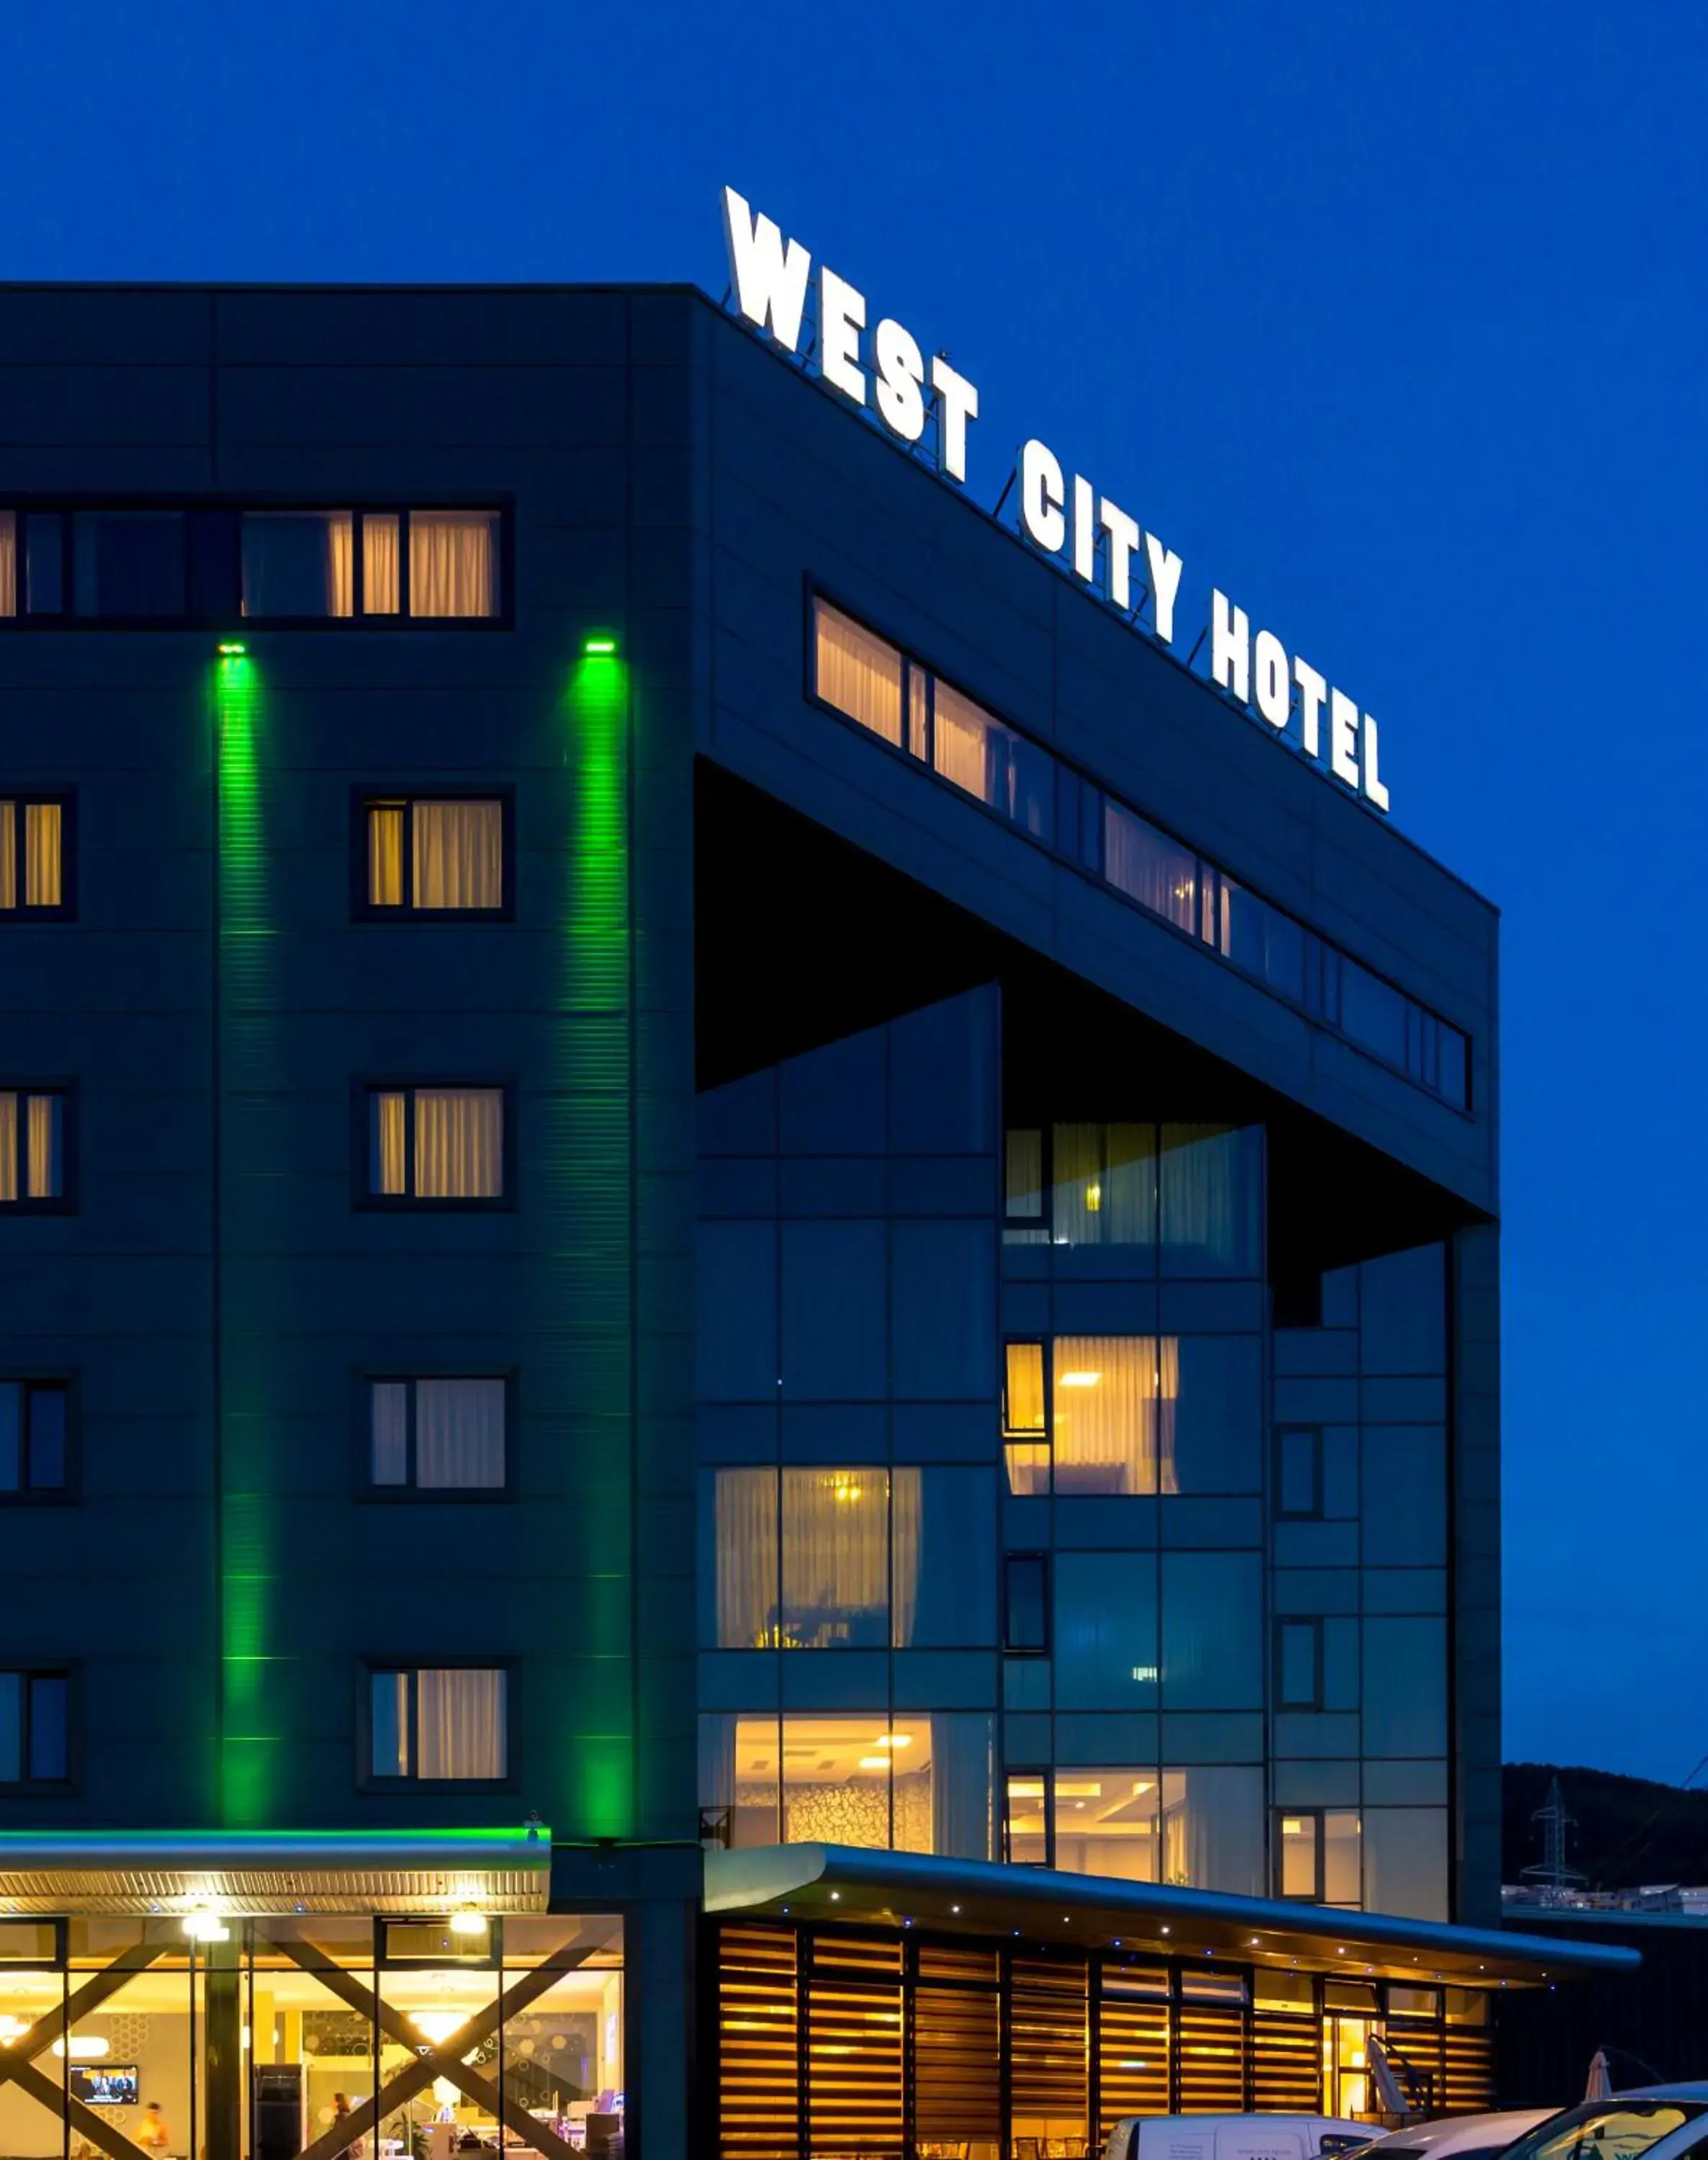 Property building in West City Hotel